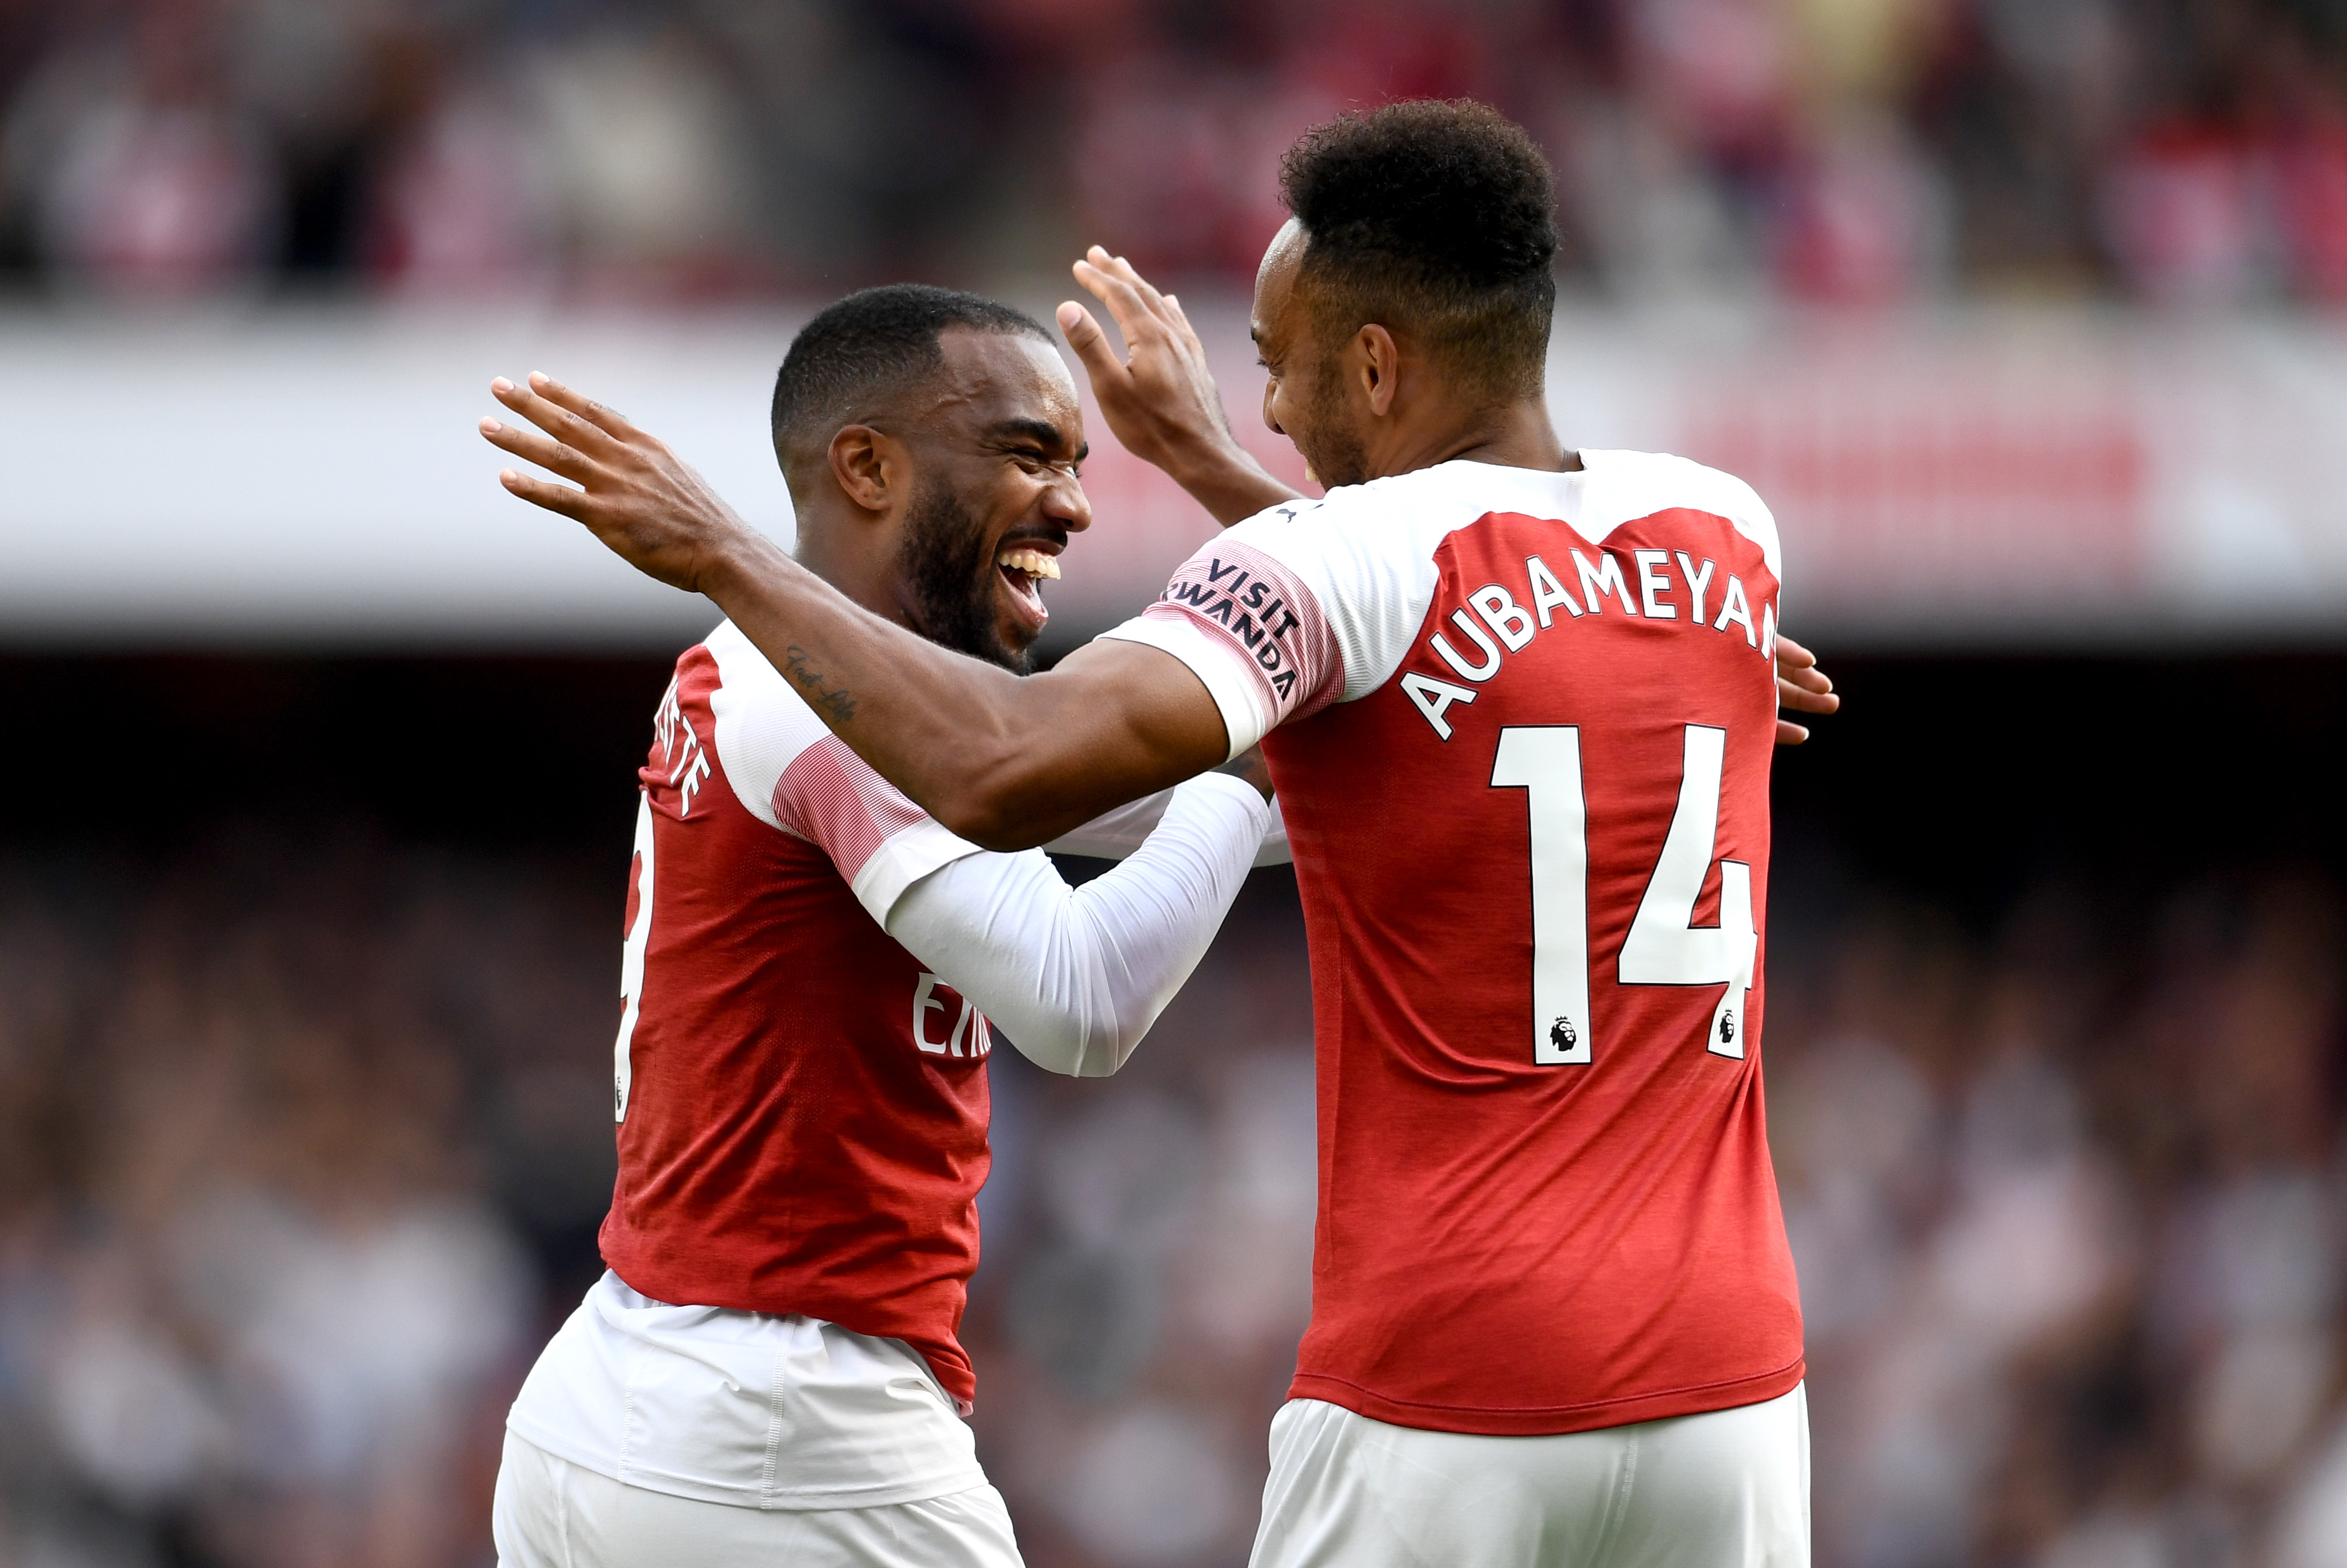 Arsenal will need both of them at top form. (Picture Courtesy - AFP/Getty Images)